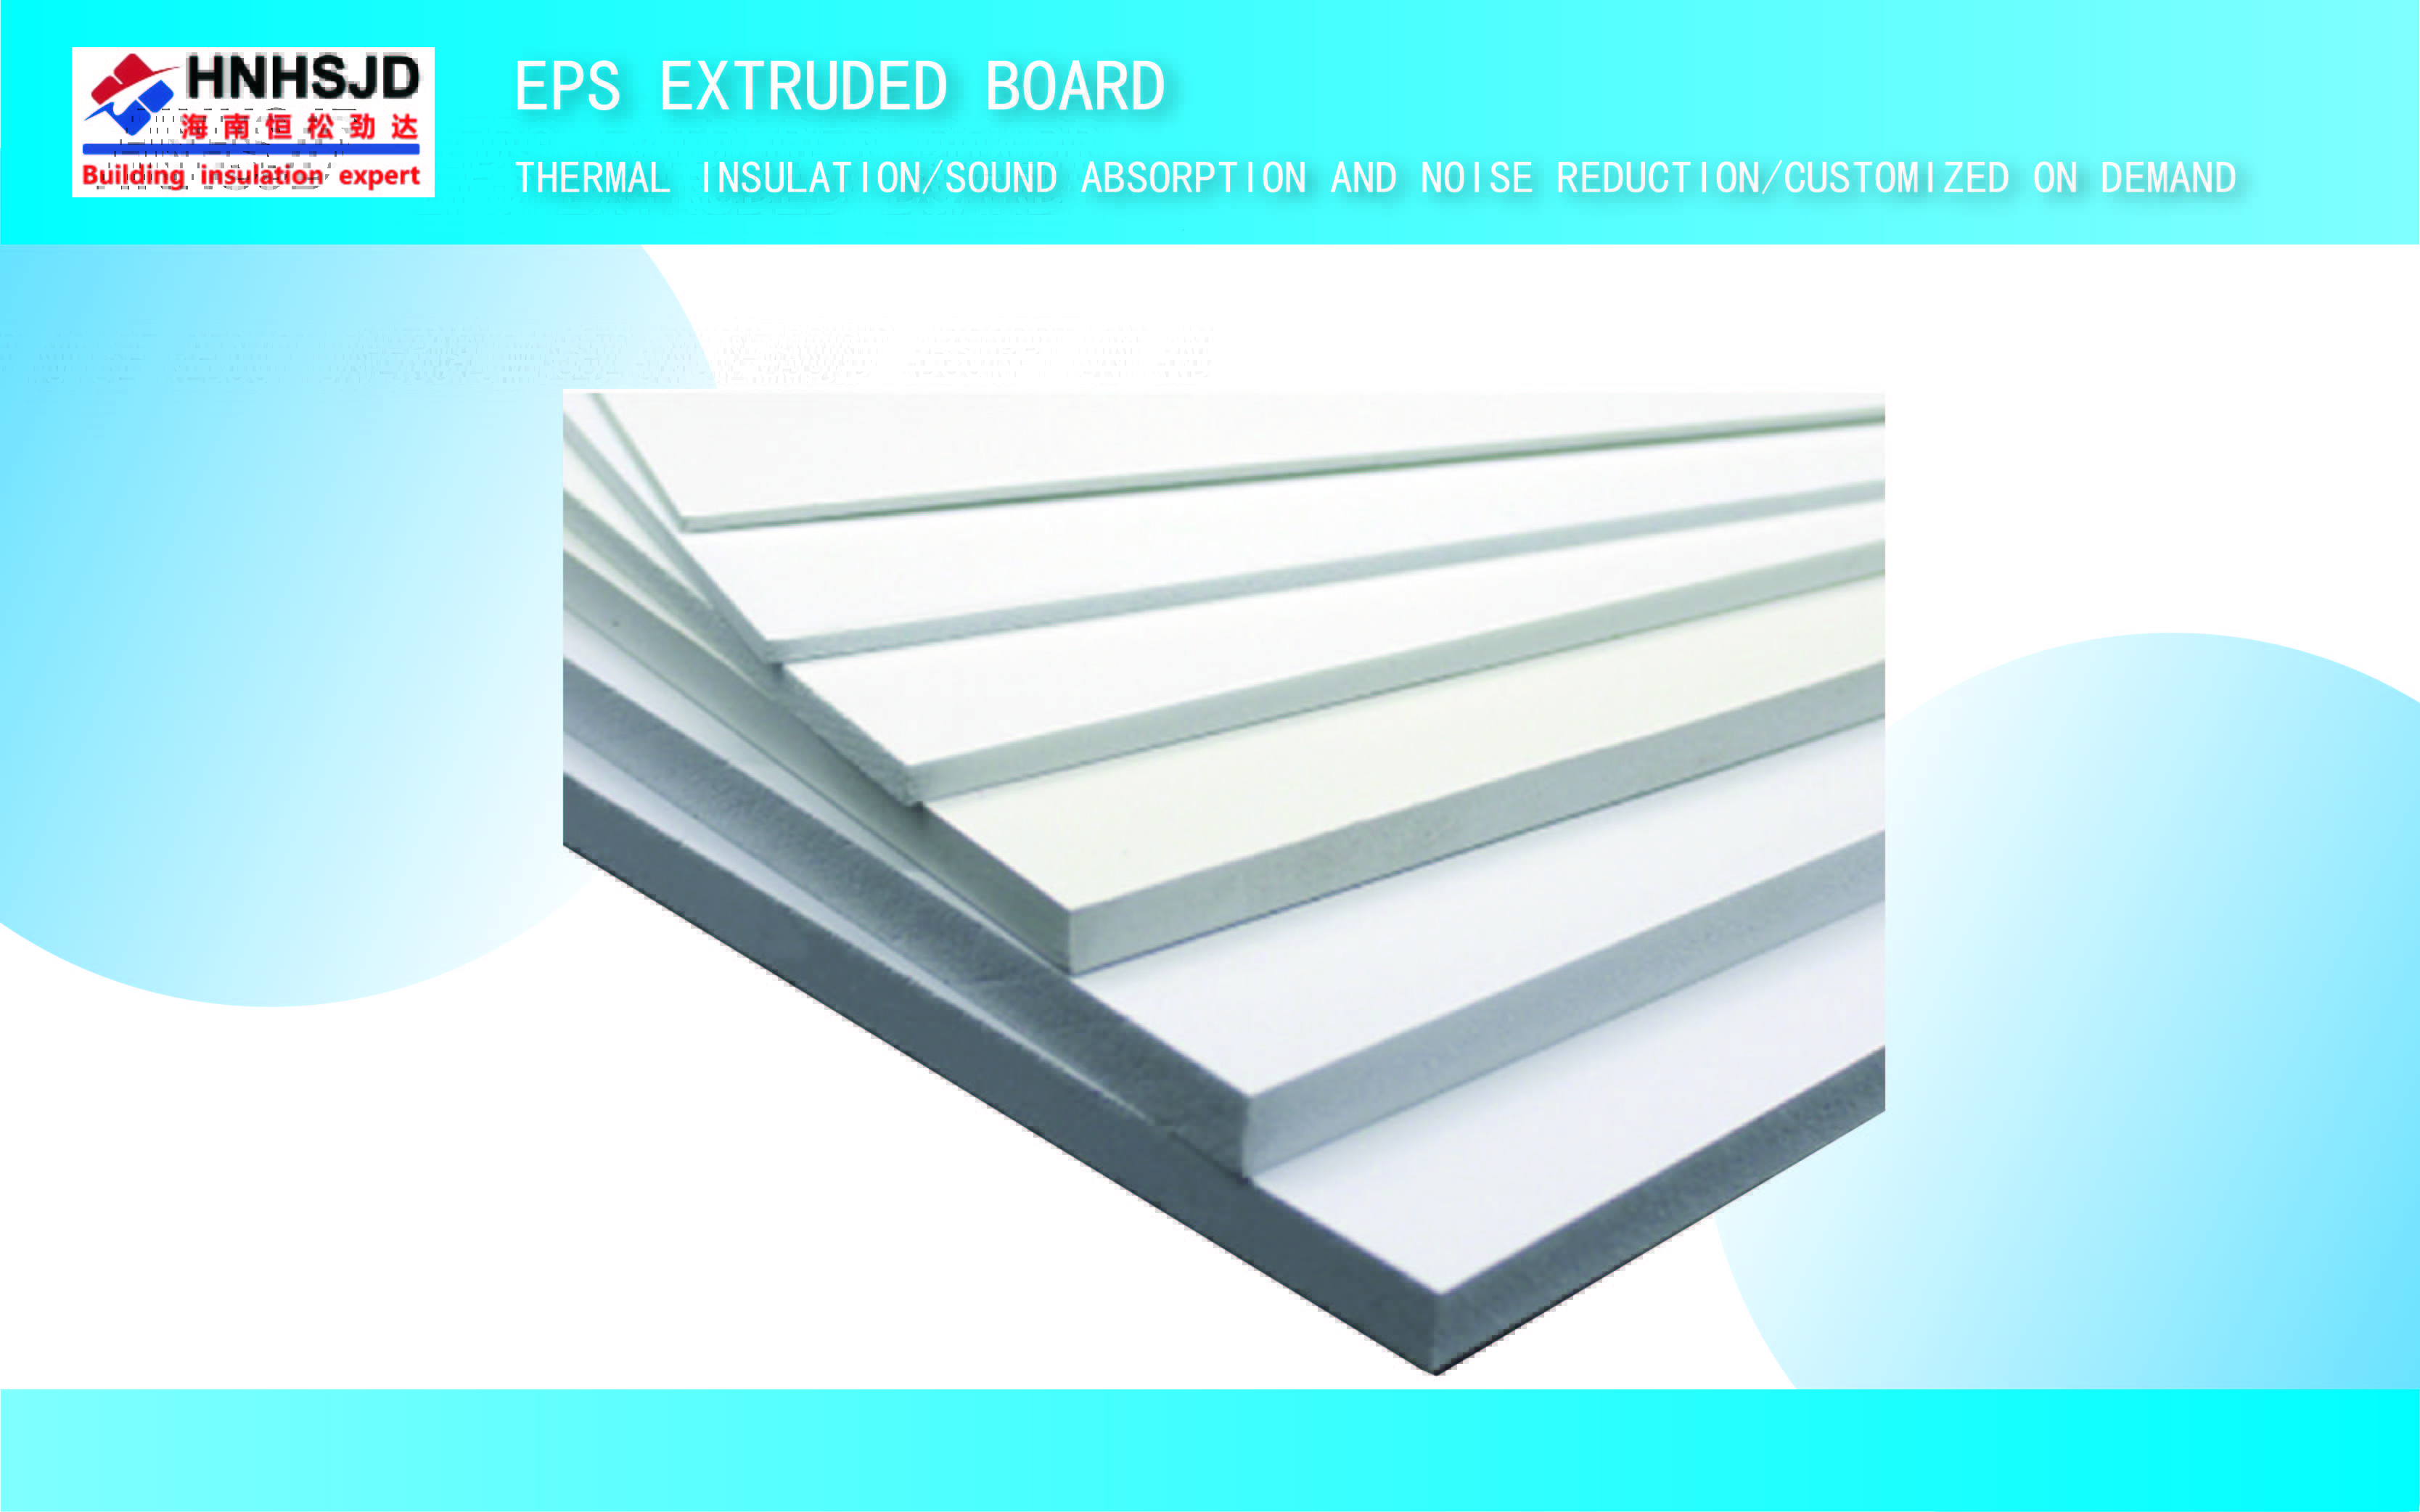 EPS extruded board